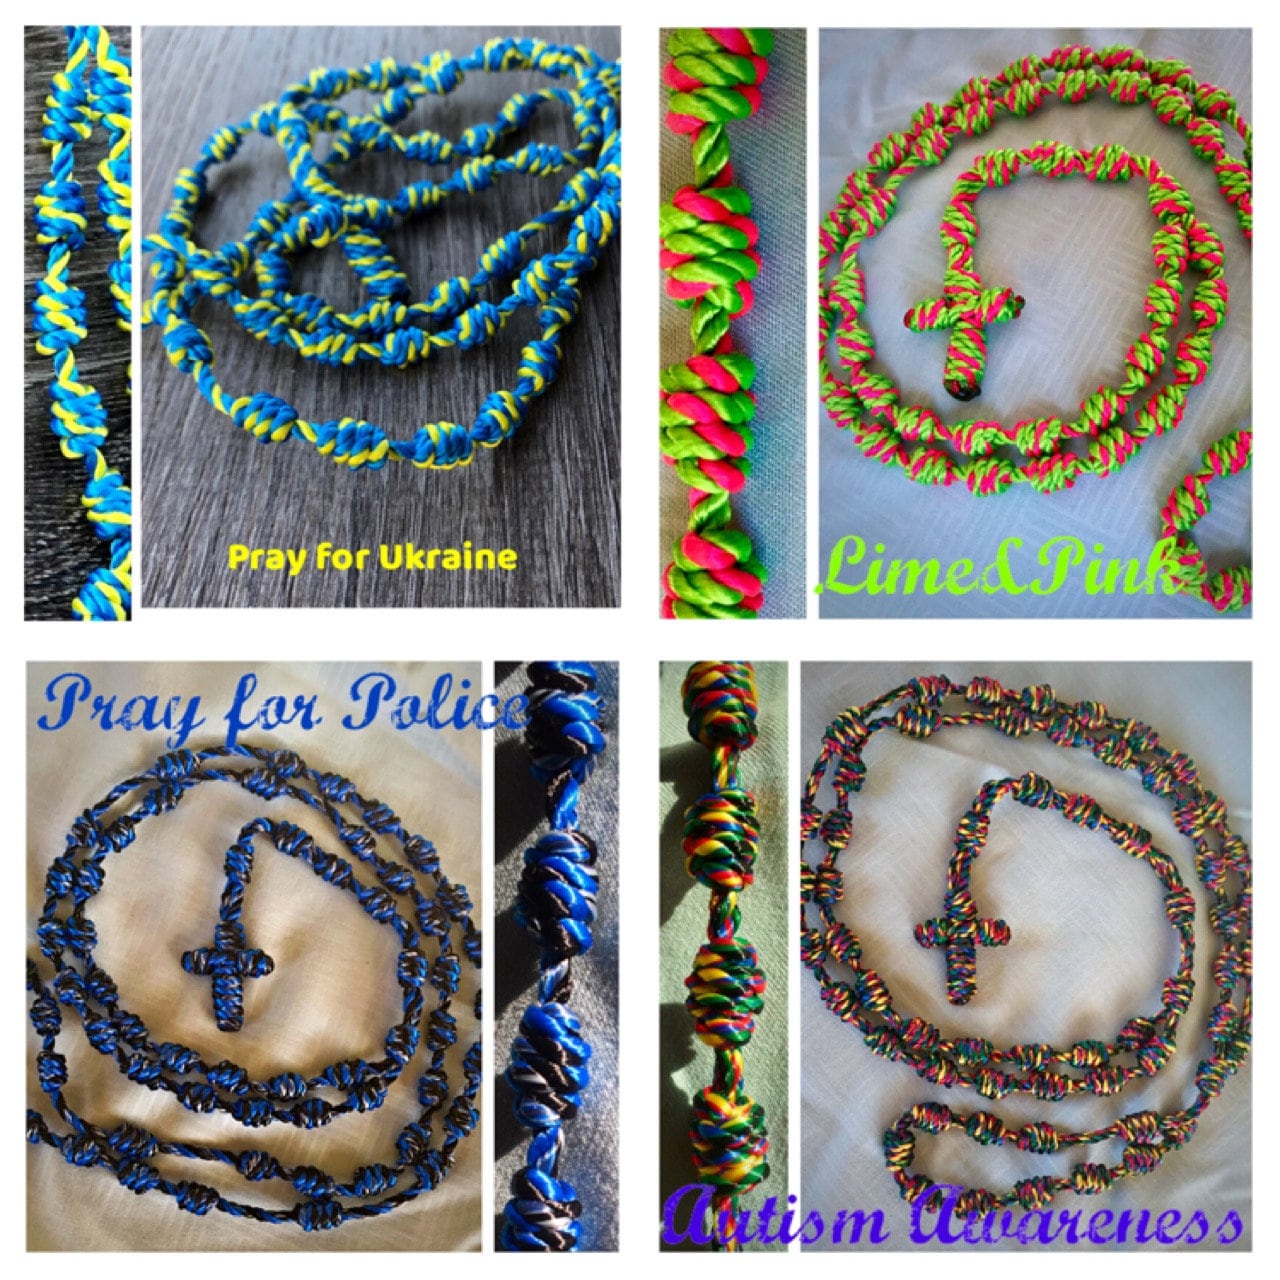 Knotted Rosary Necklace Tutorial #beadjewelry #rosary #beadtutorials  #macrame #beading #knotting - YouTube